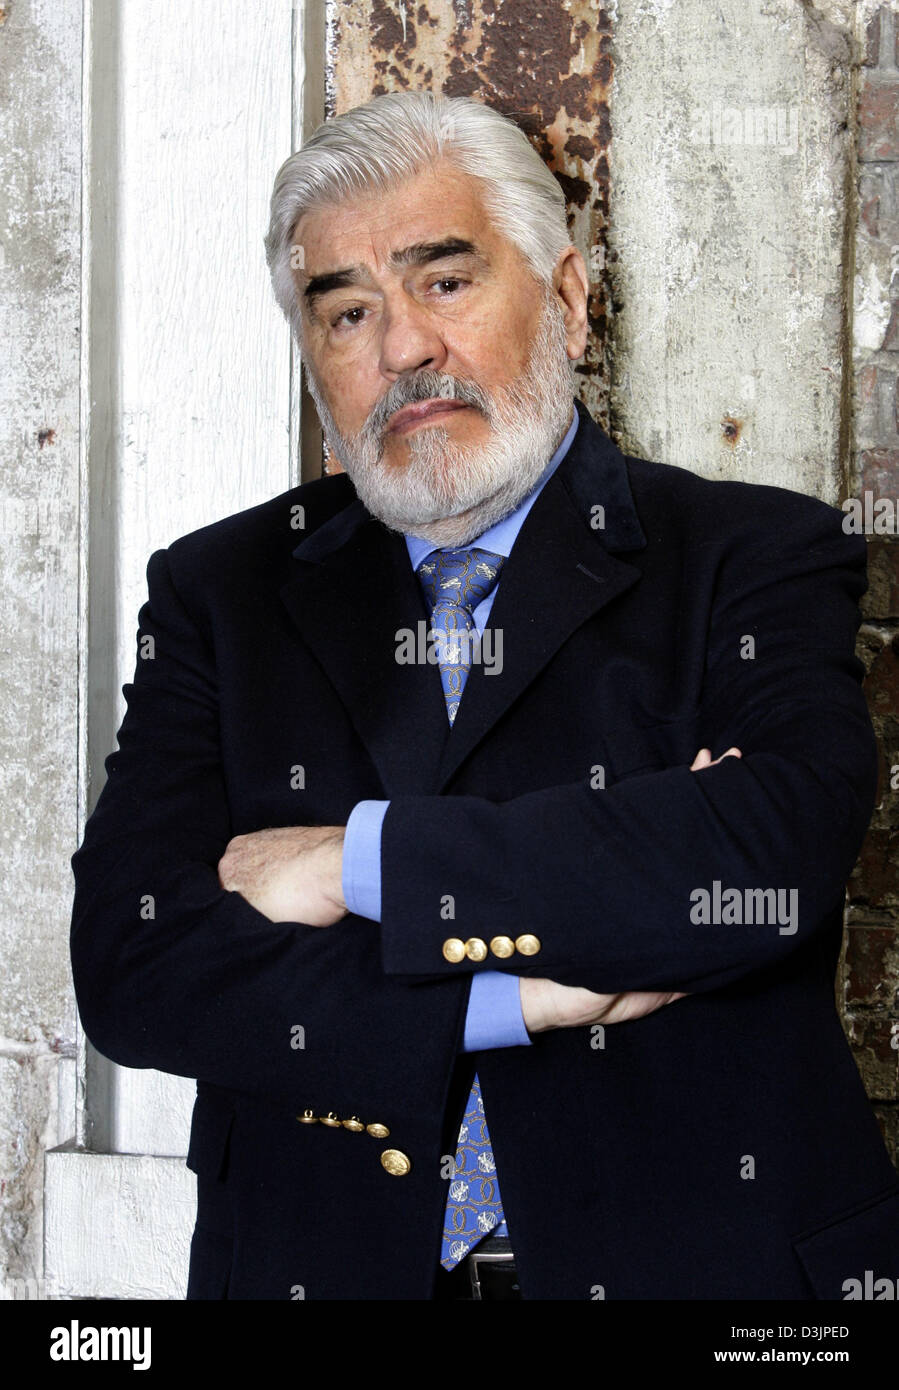 (dpa) - German actor Mario Adorf pictured during the presentation for his new television film 'Vera - Die Frau des Sizilianers' (vera - wife of the Sicilian) in Hamburg, Germany, 8 February 2005. Adorf appeared in many European film productions, including the German films 'The Lost Honor of Katharina Blum', 'The Tin Drum' and 'Rossini'. Stock Photo